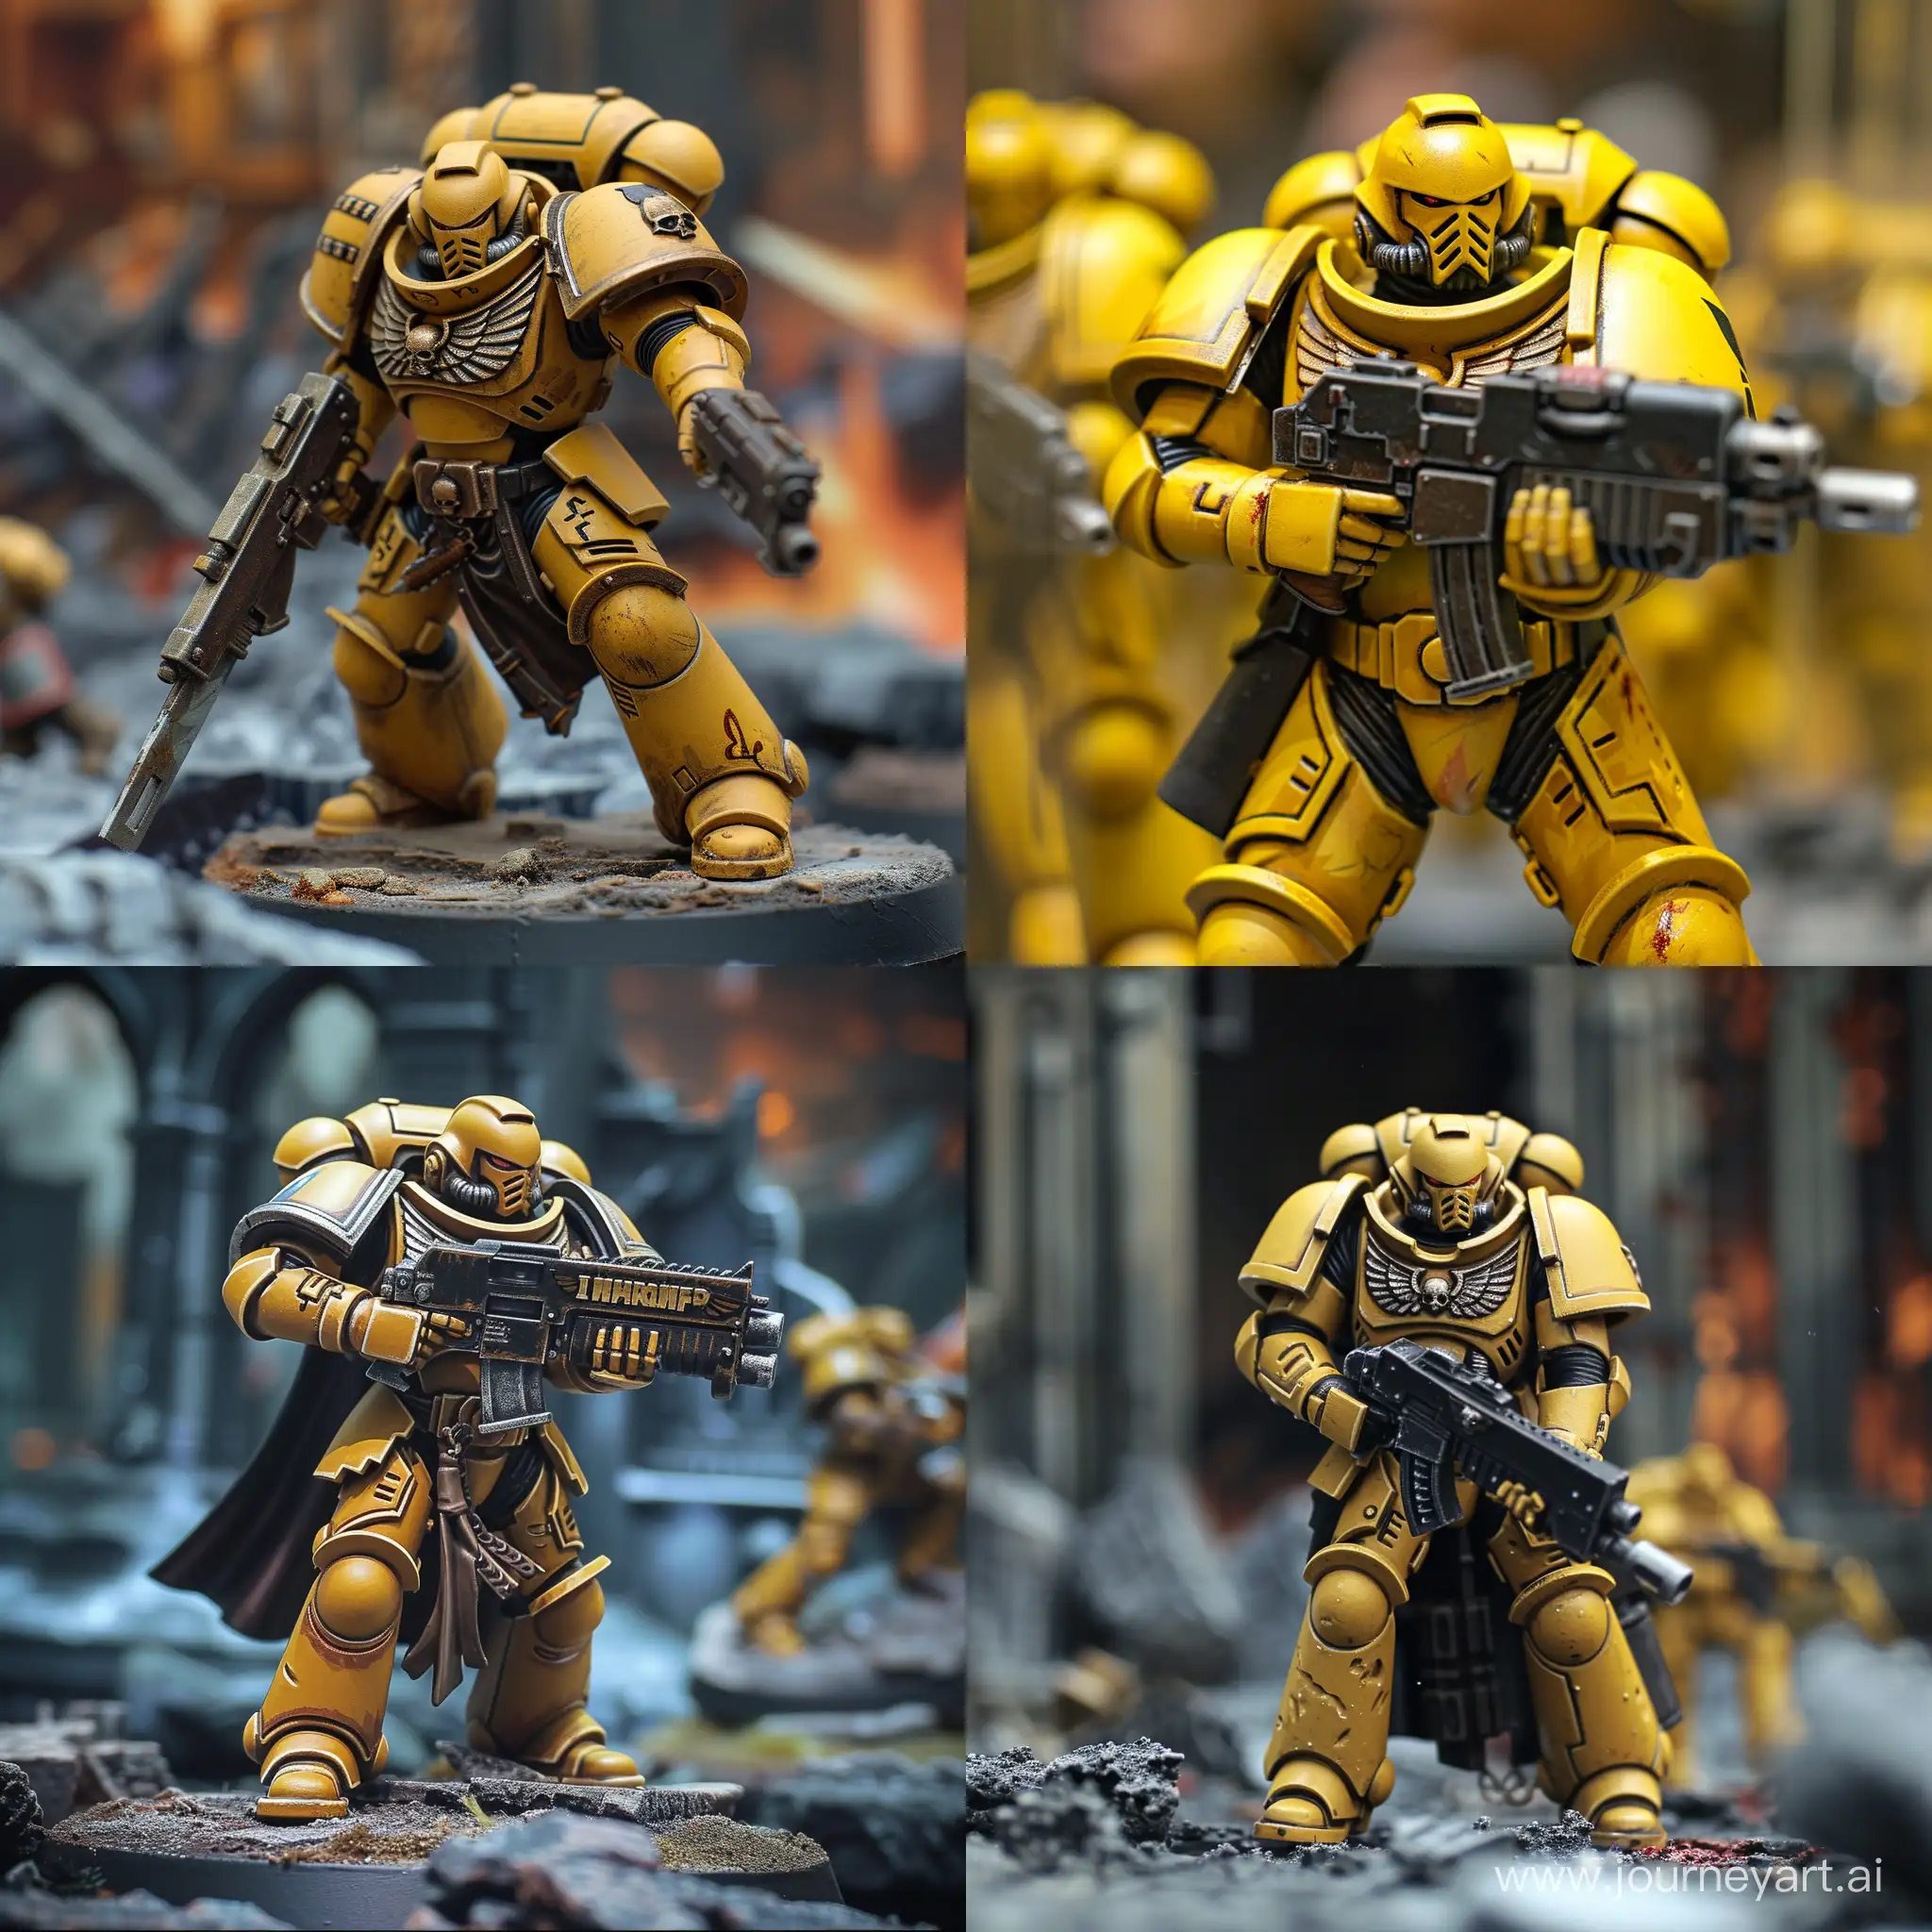 Imperial-Fists-Space-Marines-in-Warhammer-40000-Battle-Formation